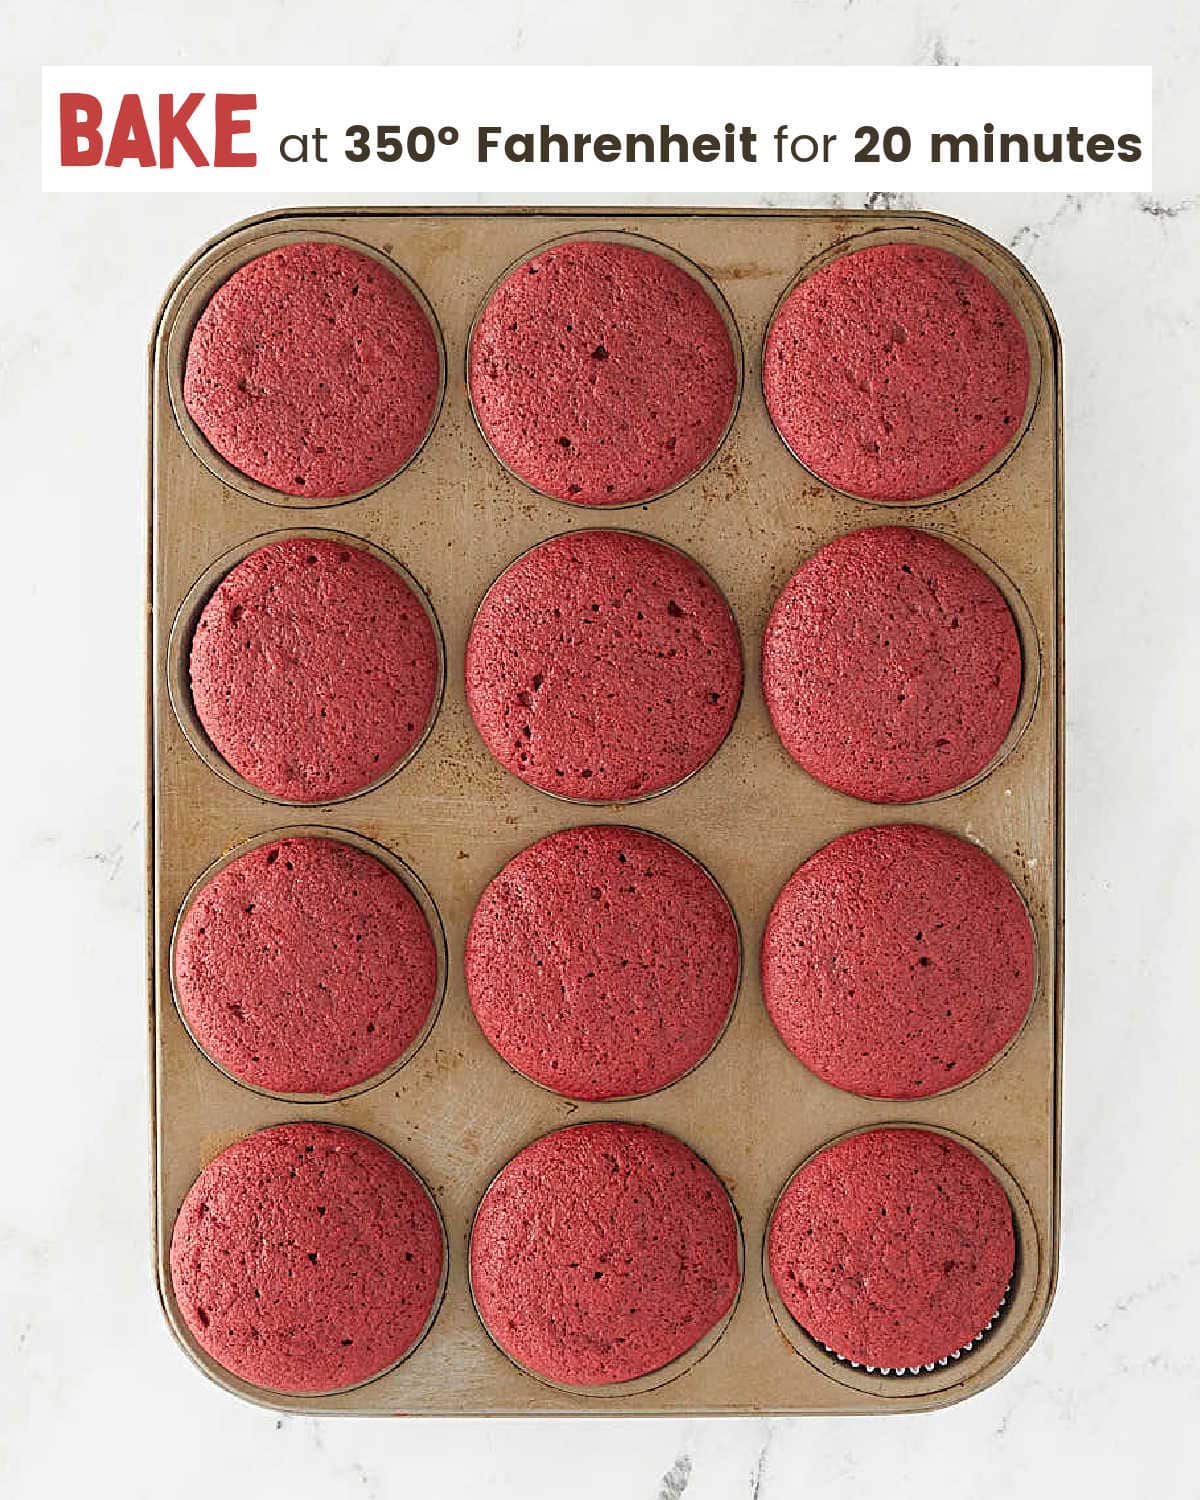 A baking tray with red cupcakes.